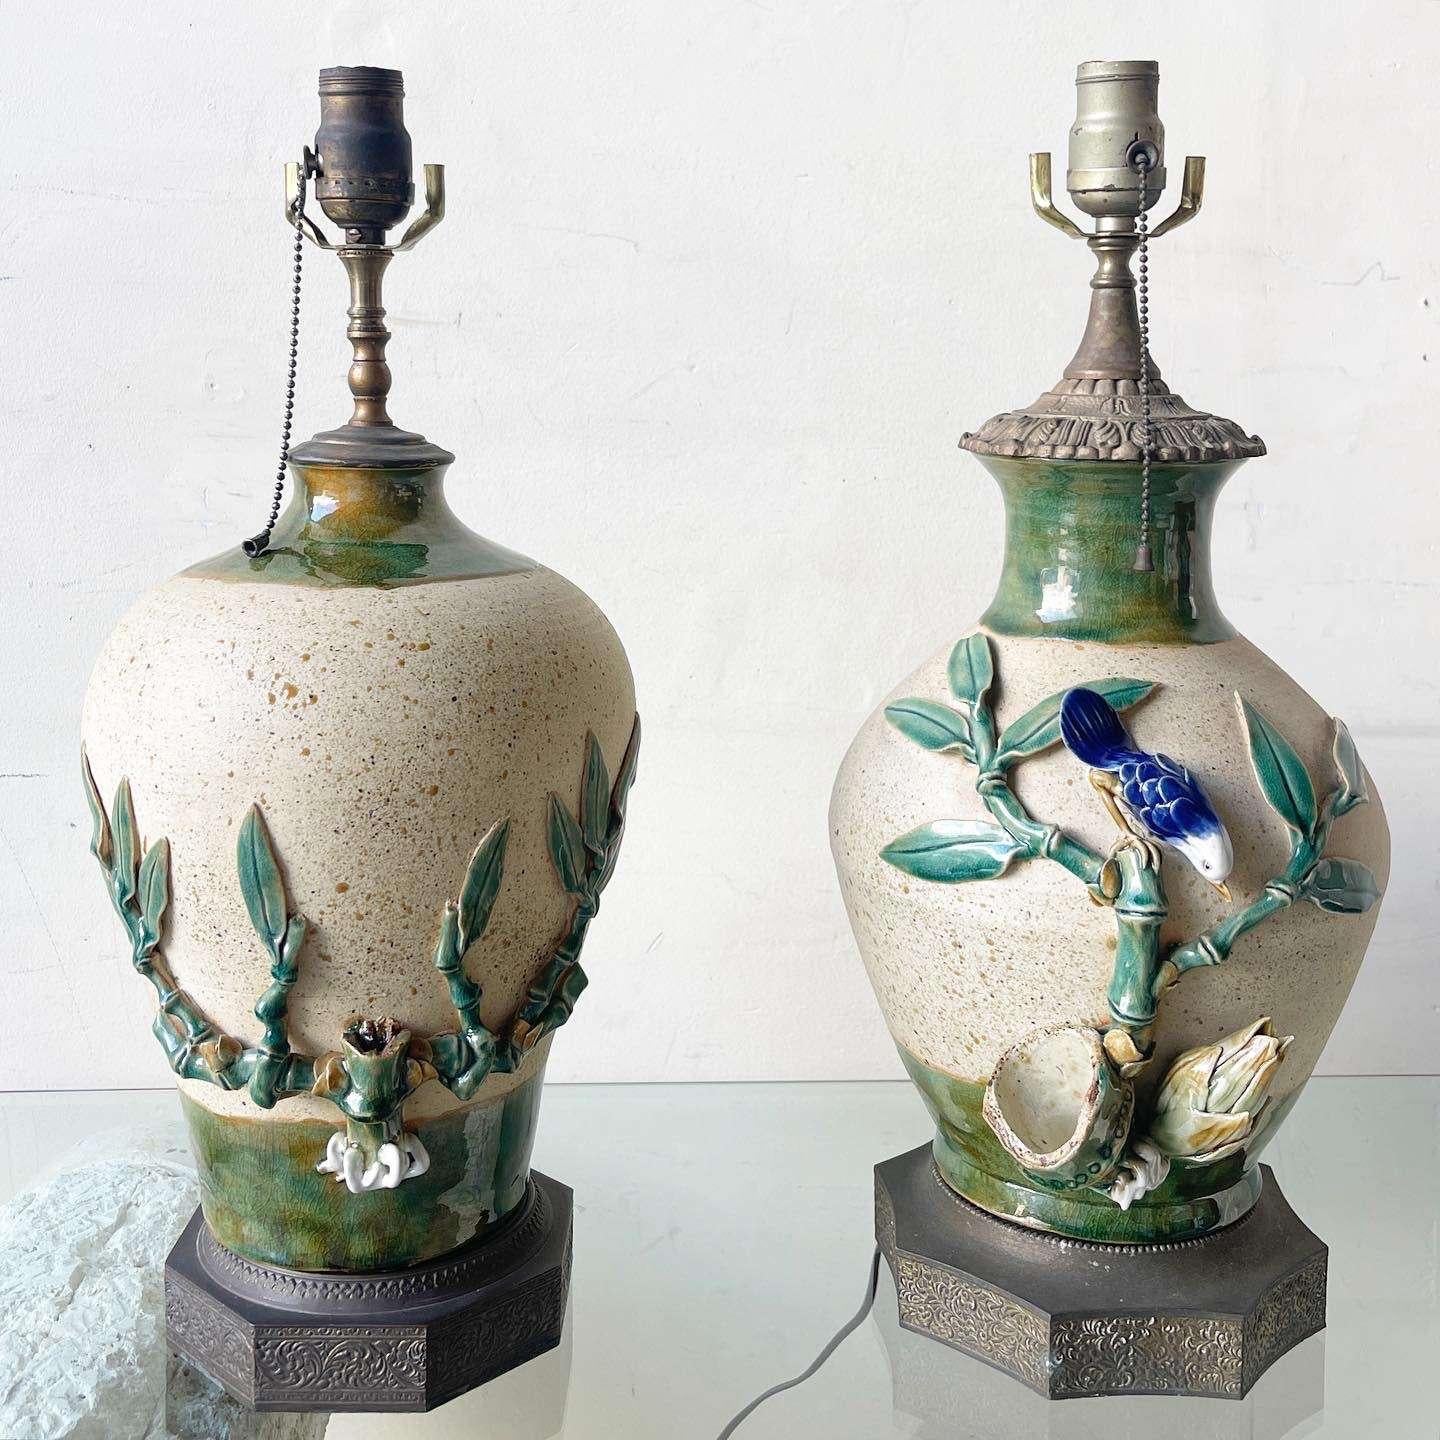 Chinoiserie Vintage Ceramic Hand Painted and Sculpted Table Lamps With Brass Bases - a Pair For Sale